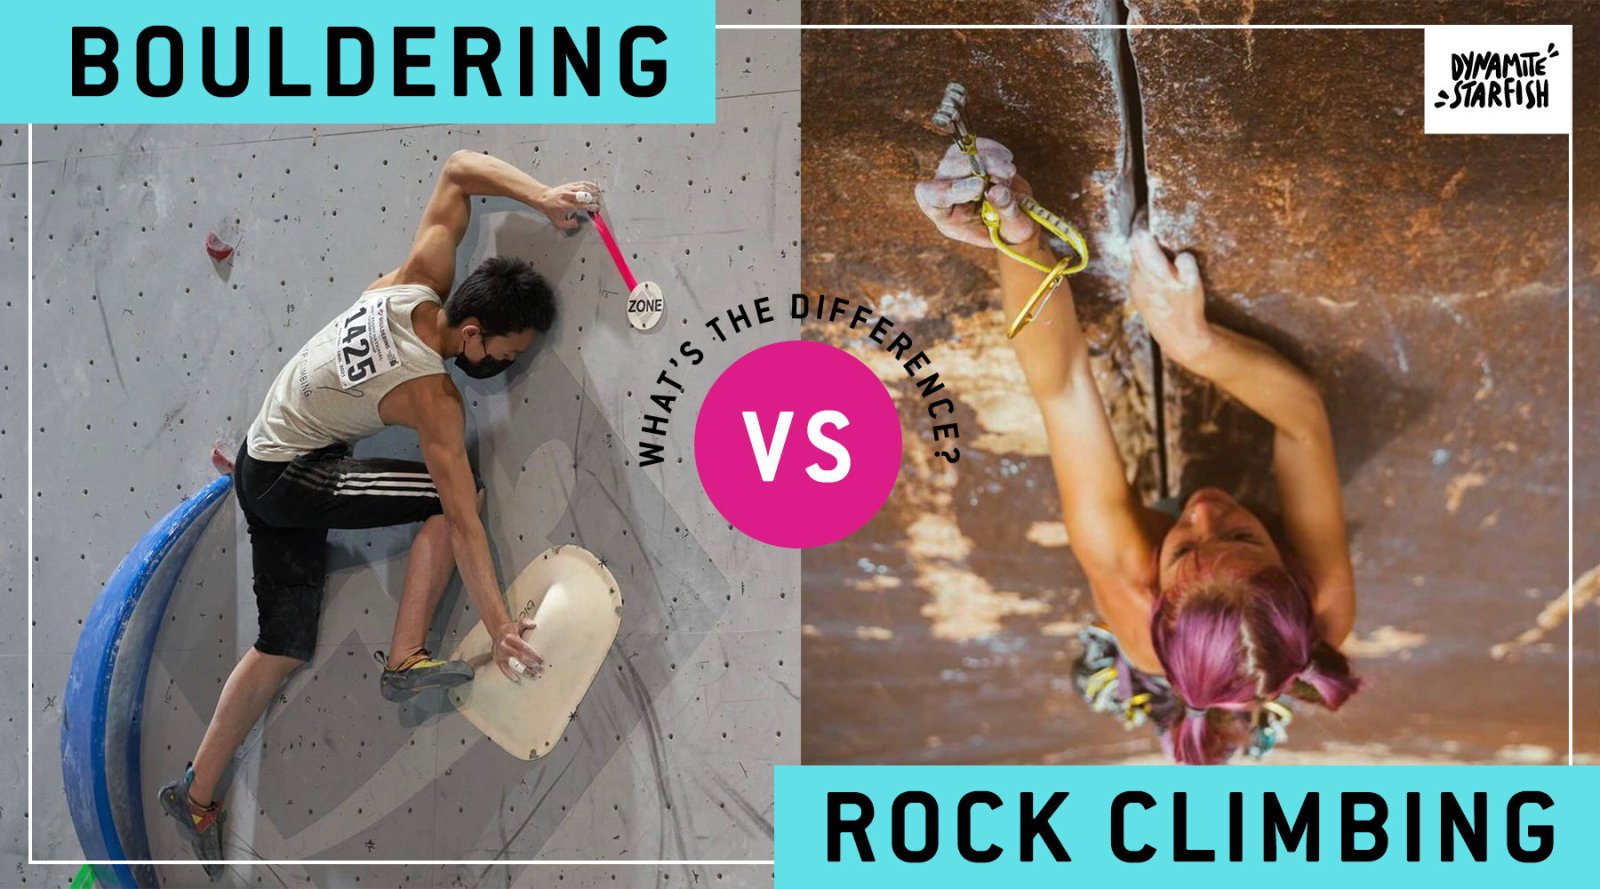 Rock Climbing vs Bouldering: A Terminology Guide to Climbing Styles - Dynamite Starfish